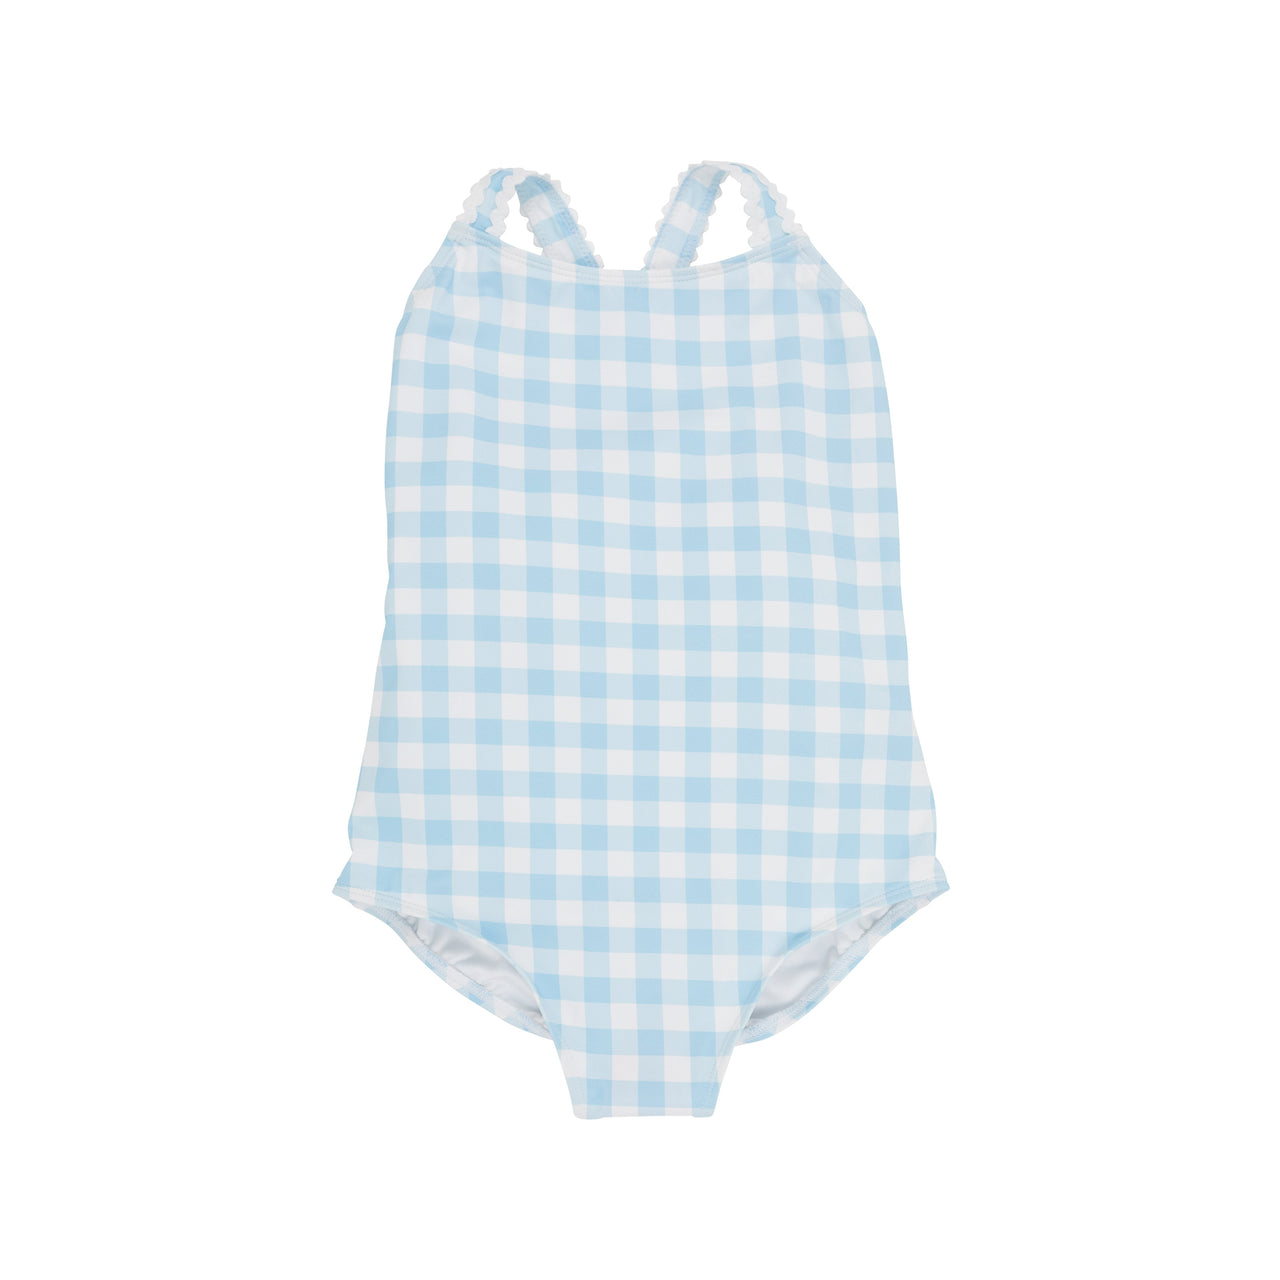 Taylor Bay Bathing Suit | Buckhead Blue Gingham With Worth Avenue White